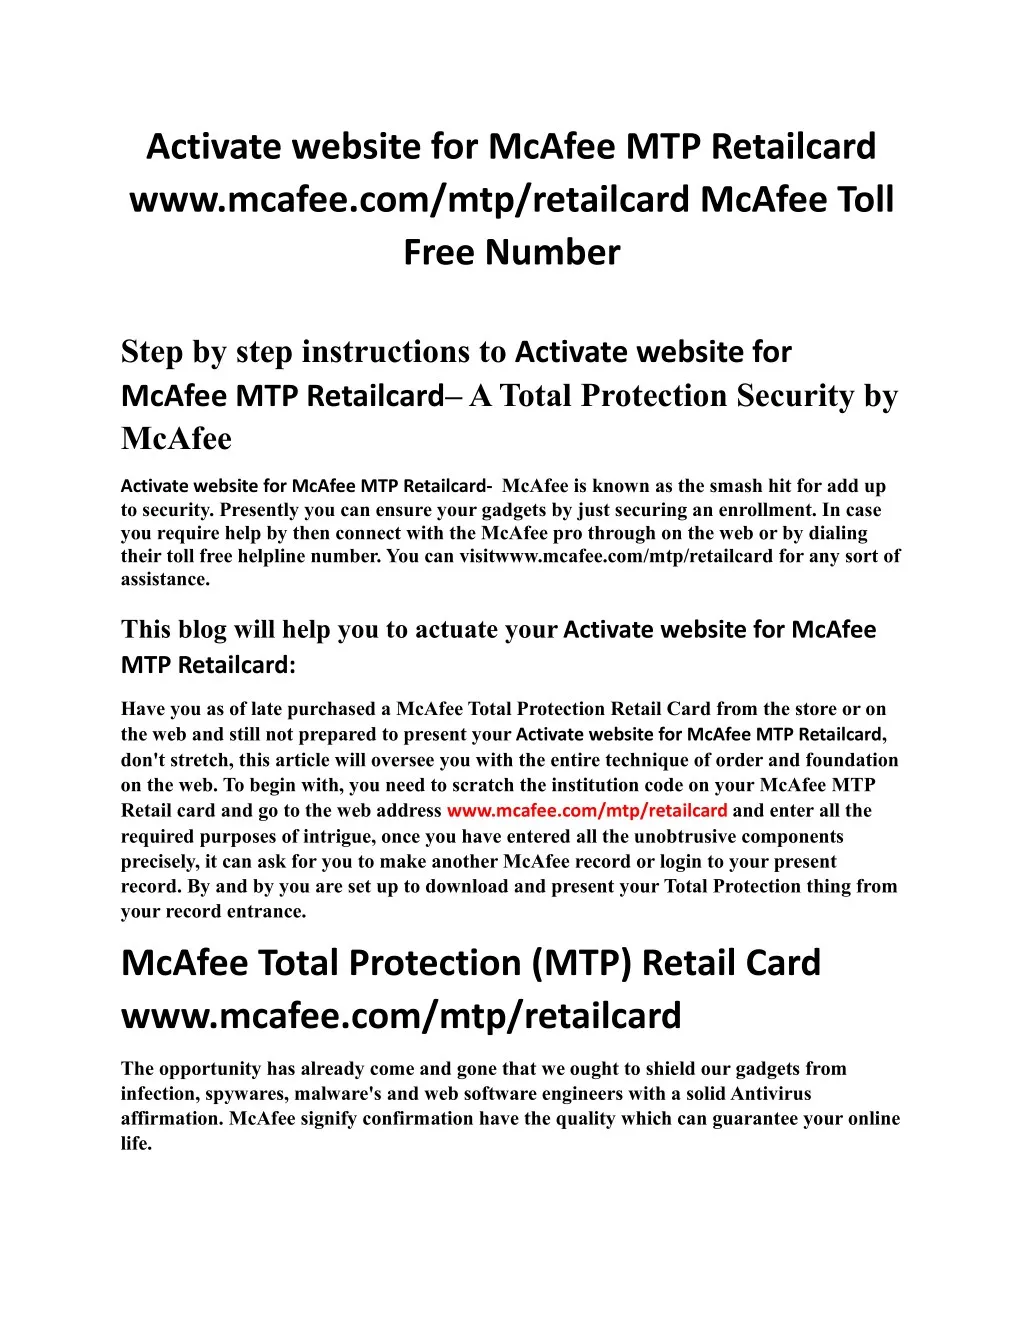 activate website for mcafee mtp retailcard